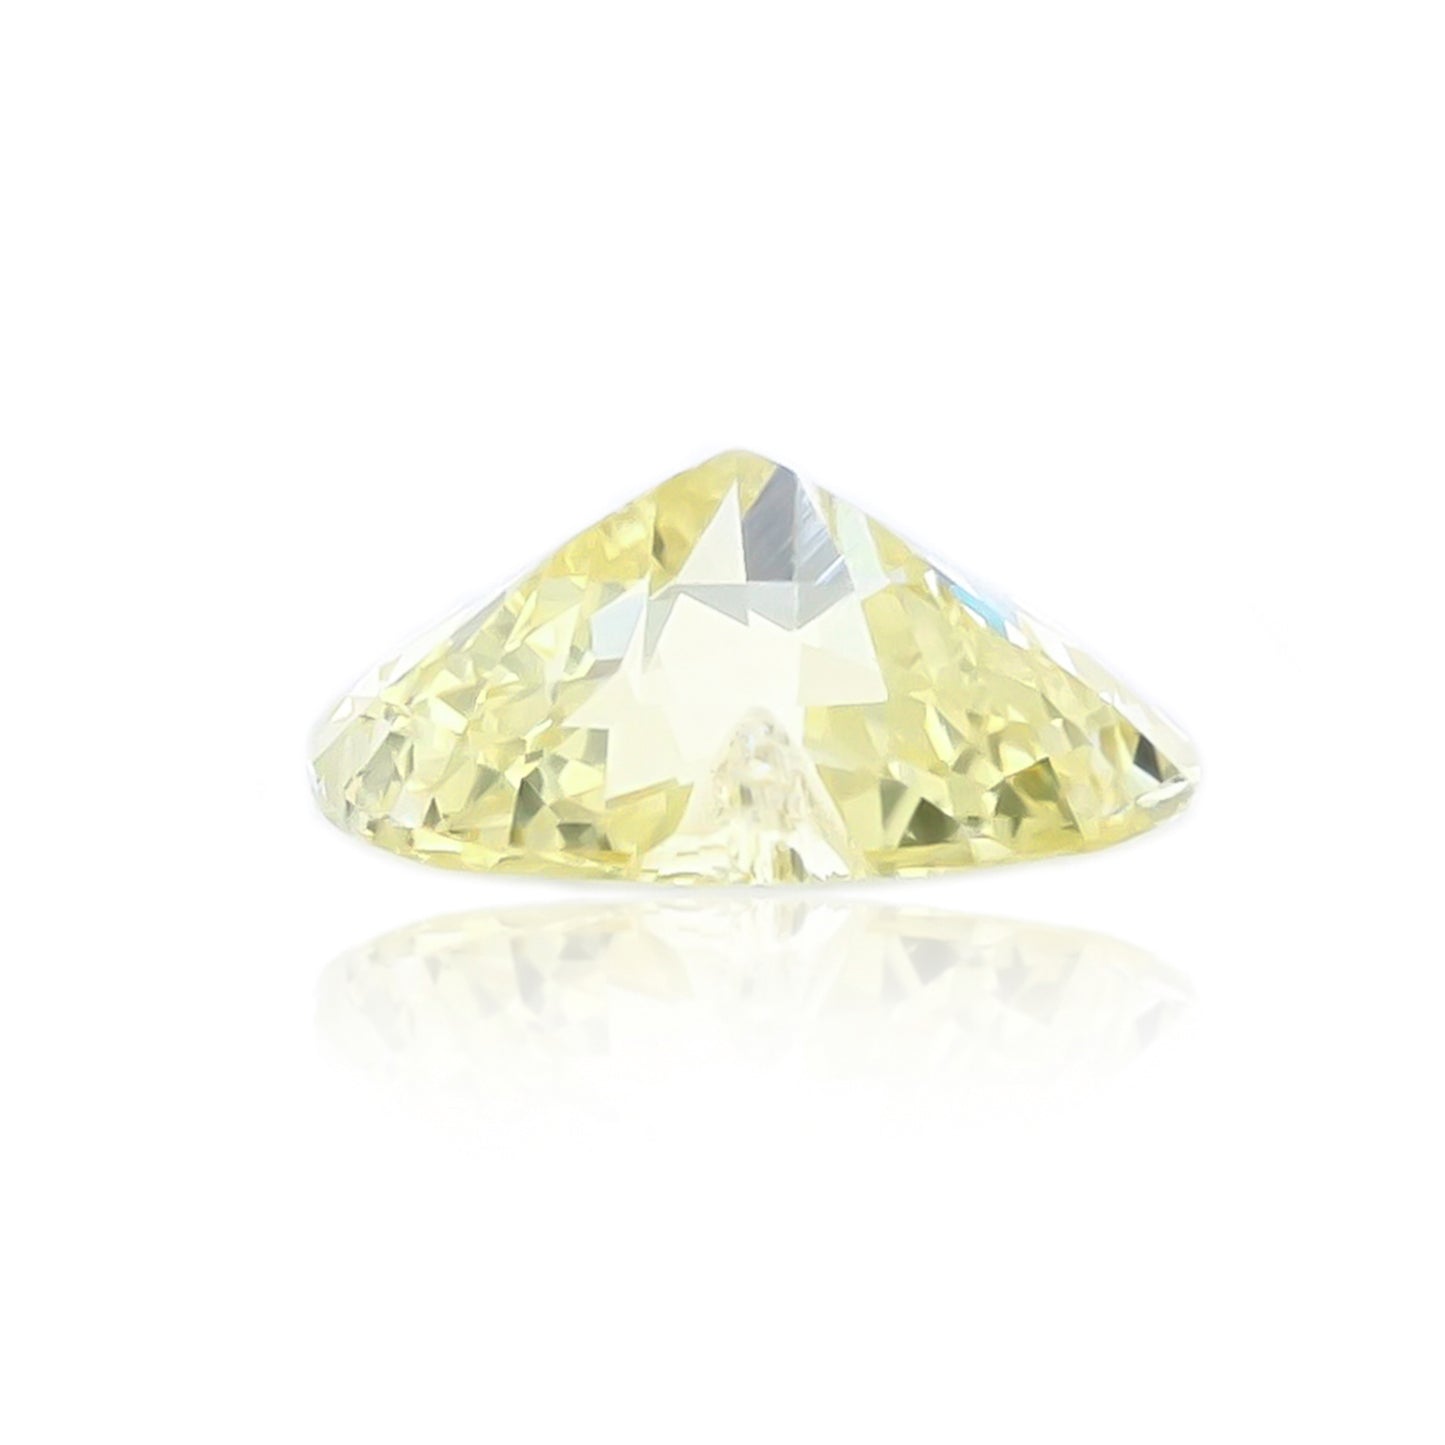 Load image into Gallery viewer, Natural Unheated Yellow Sapphire Heart Shape 3.50 carats
